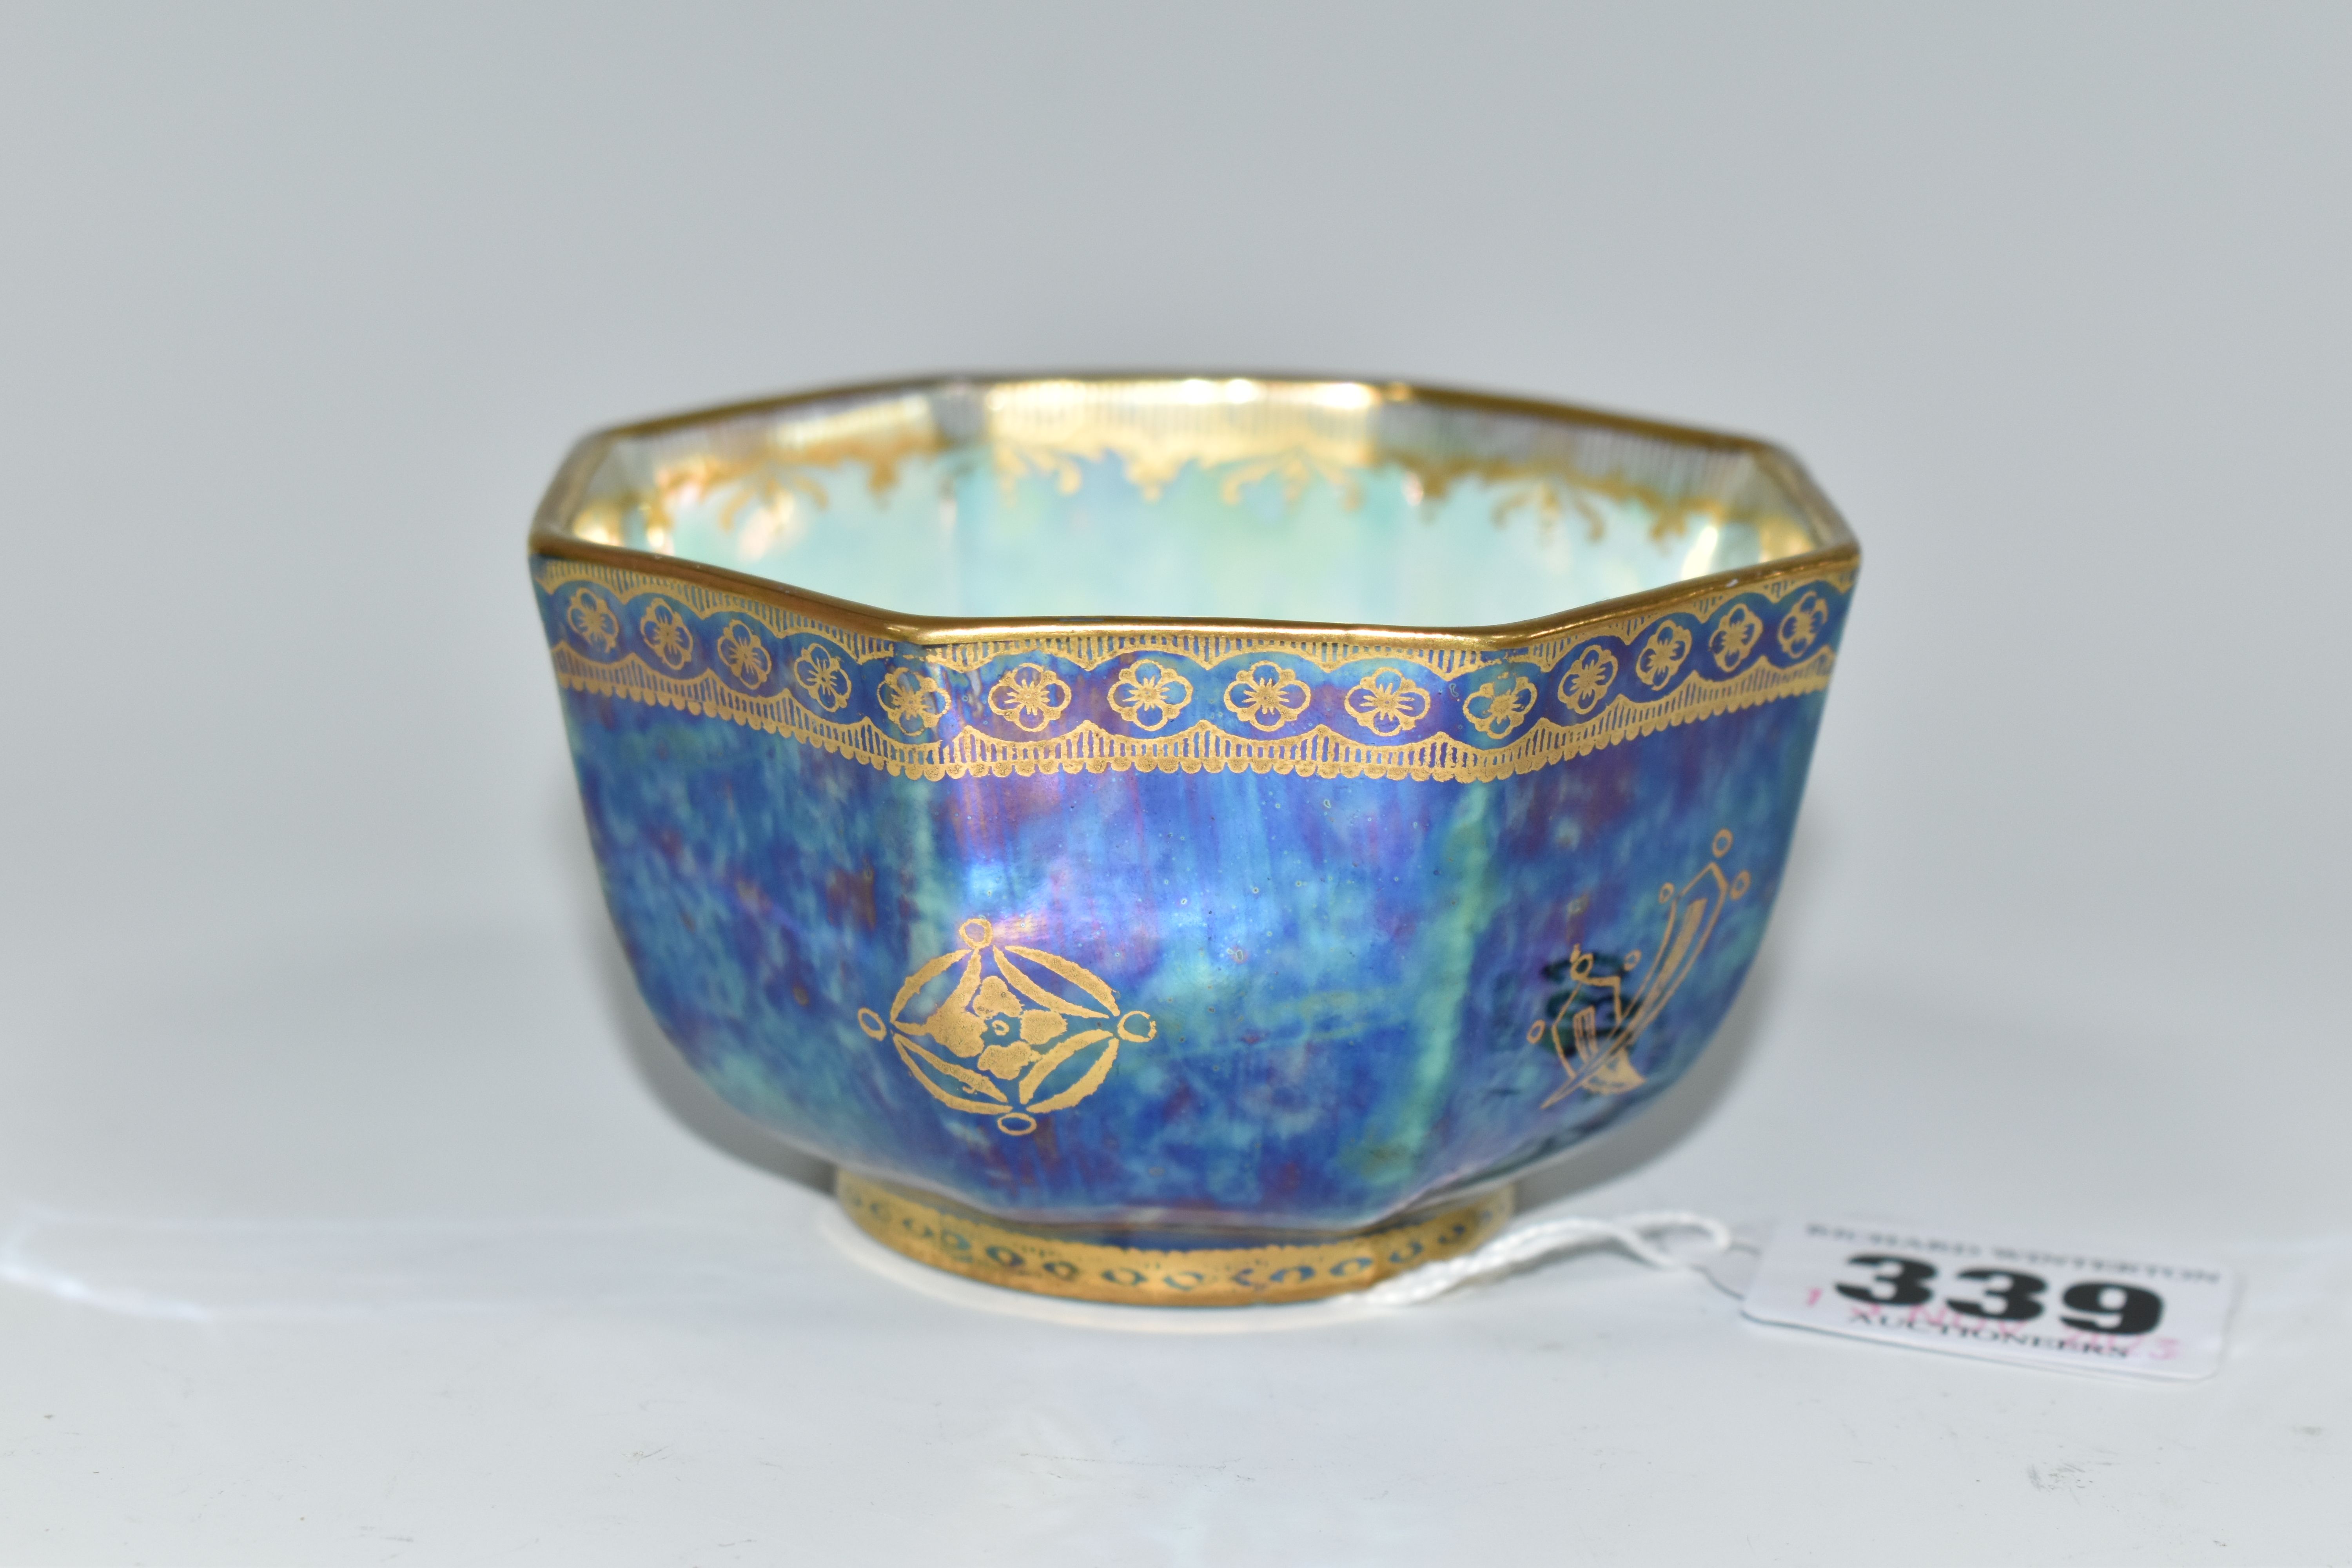 A WEDGWOOD DRAGON LUSTRE WARE BOWL, an octagonal bowl in pattern no Z4831, designed by Daisy